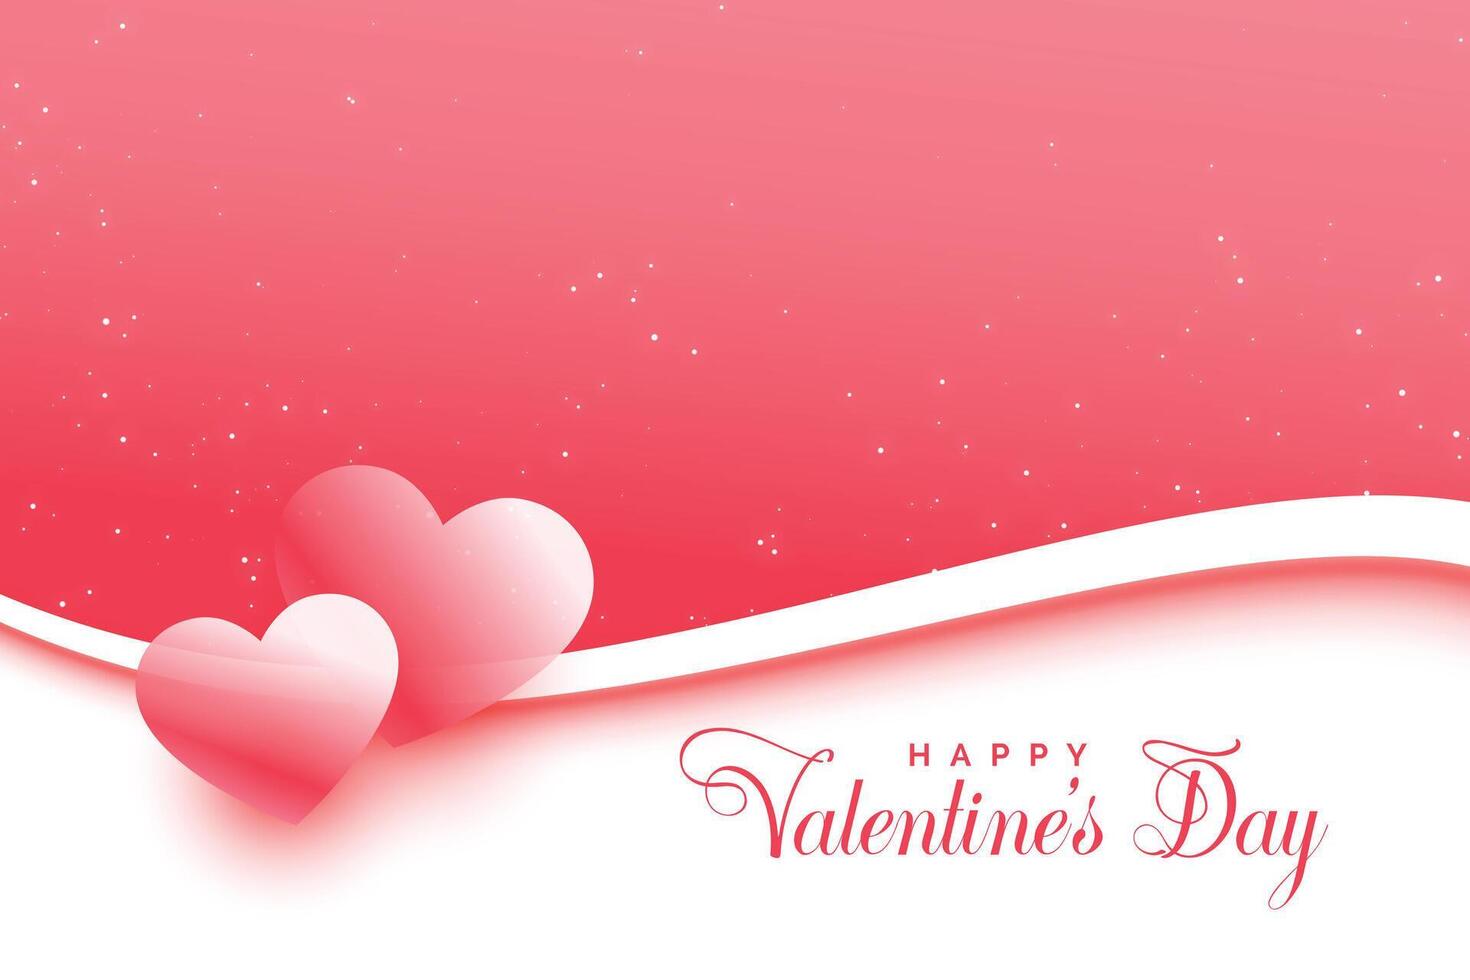 valentines day pink background with two hearts vector